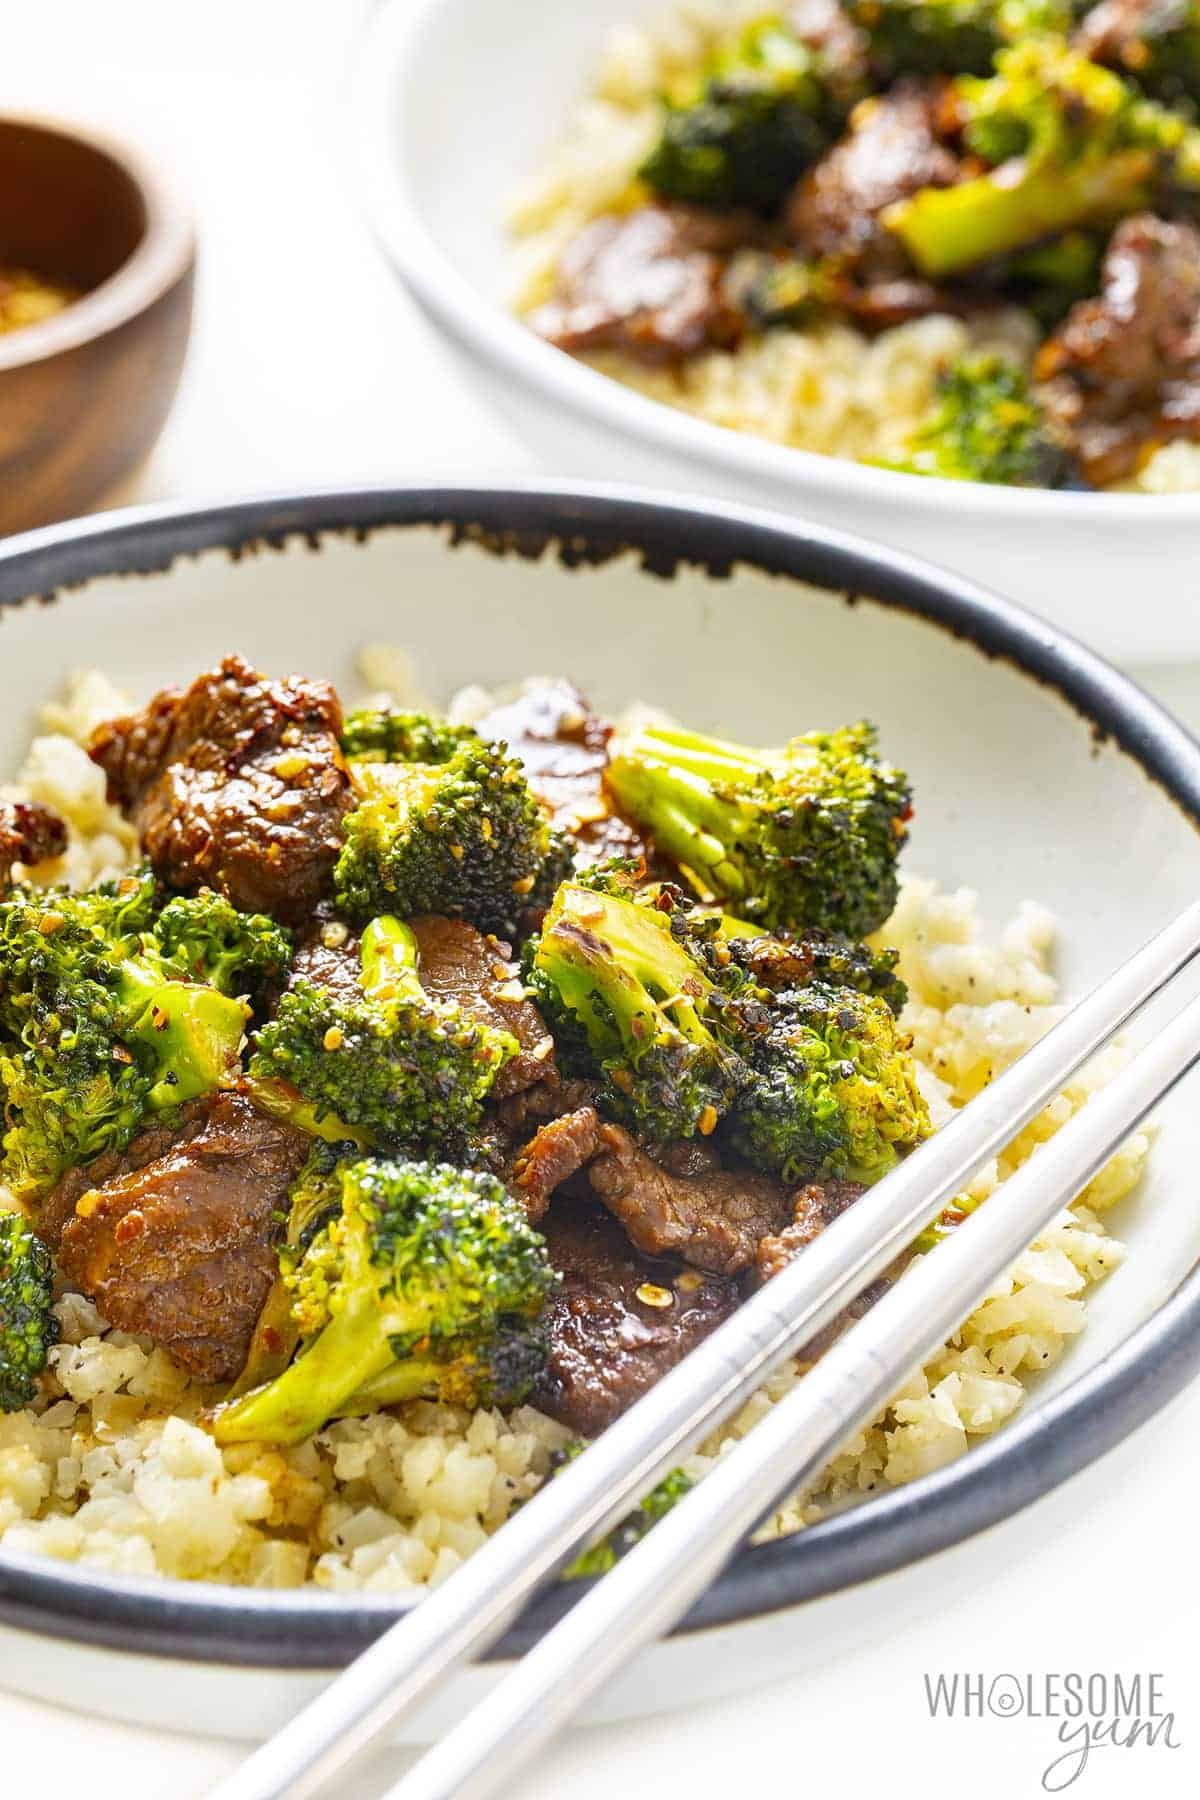 Bowl of low carb beef and broccoli over cauliflower rice.